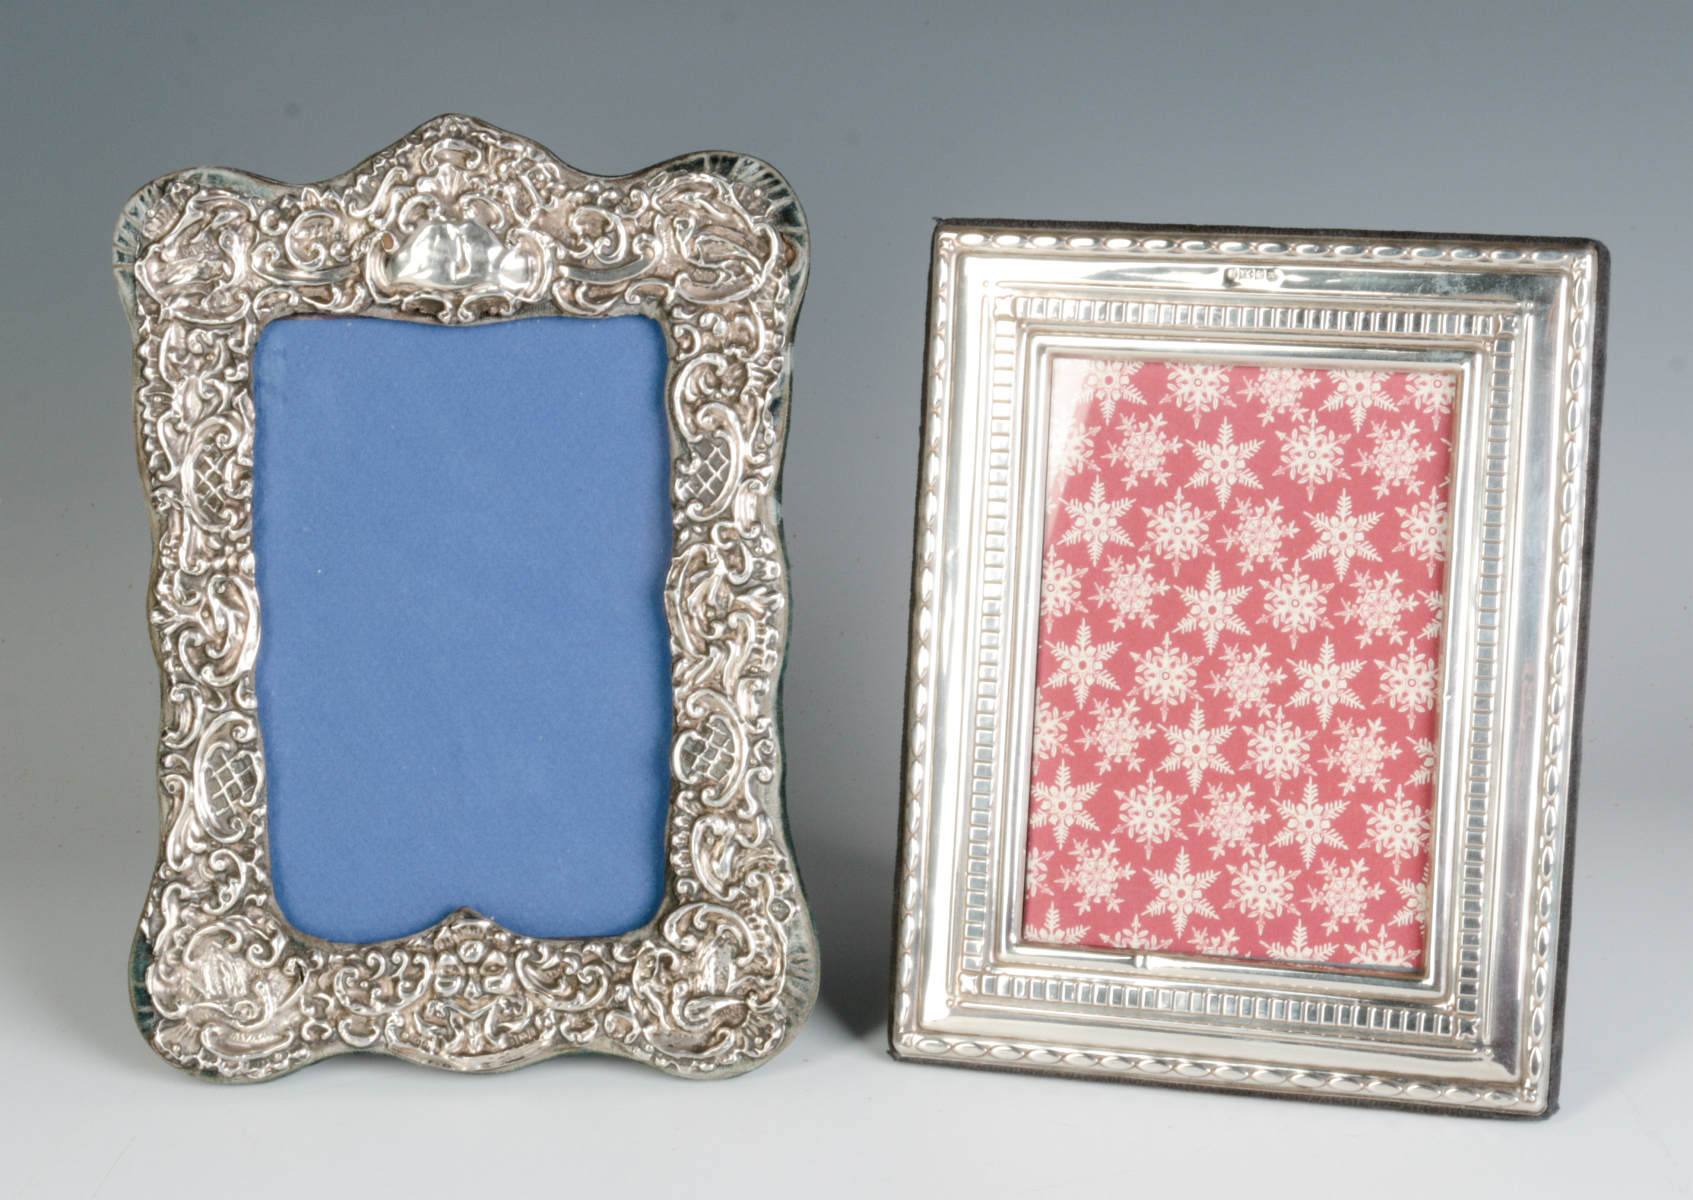 TWO STERLING SILVER EMBELLISHED PICTURE FRAMES